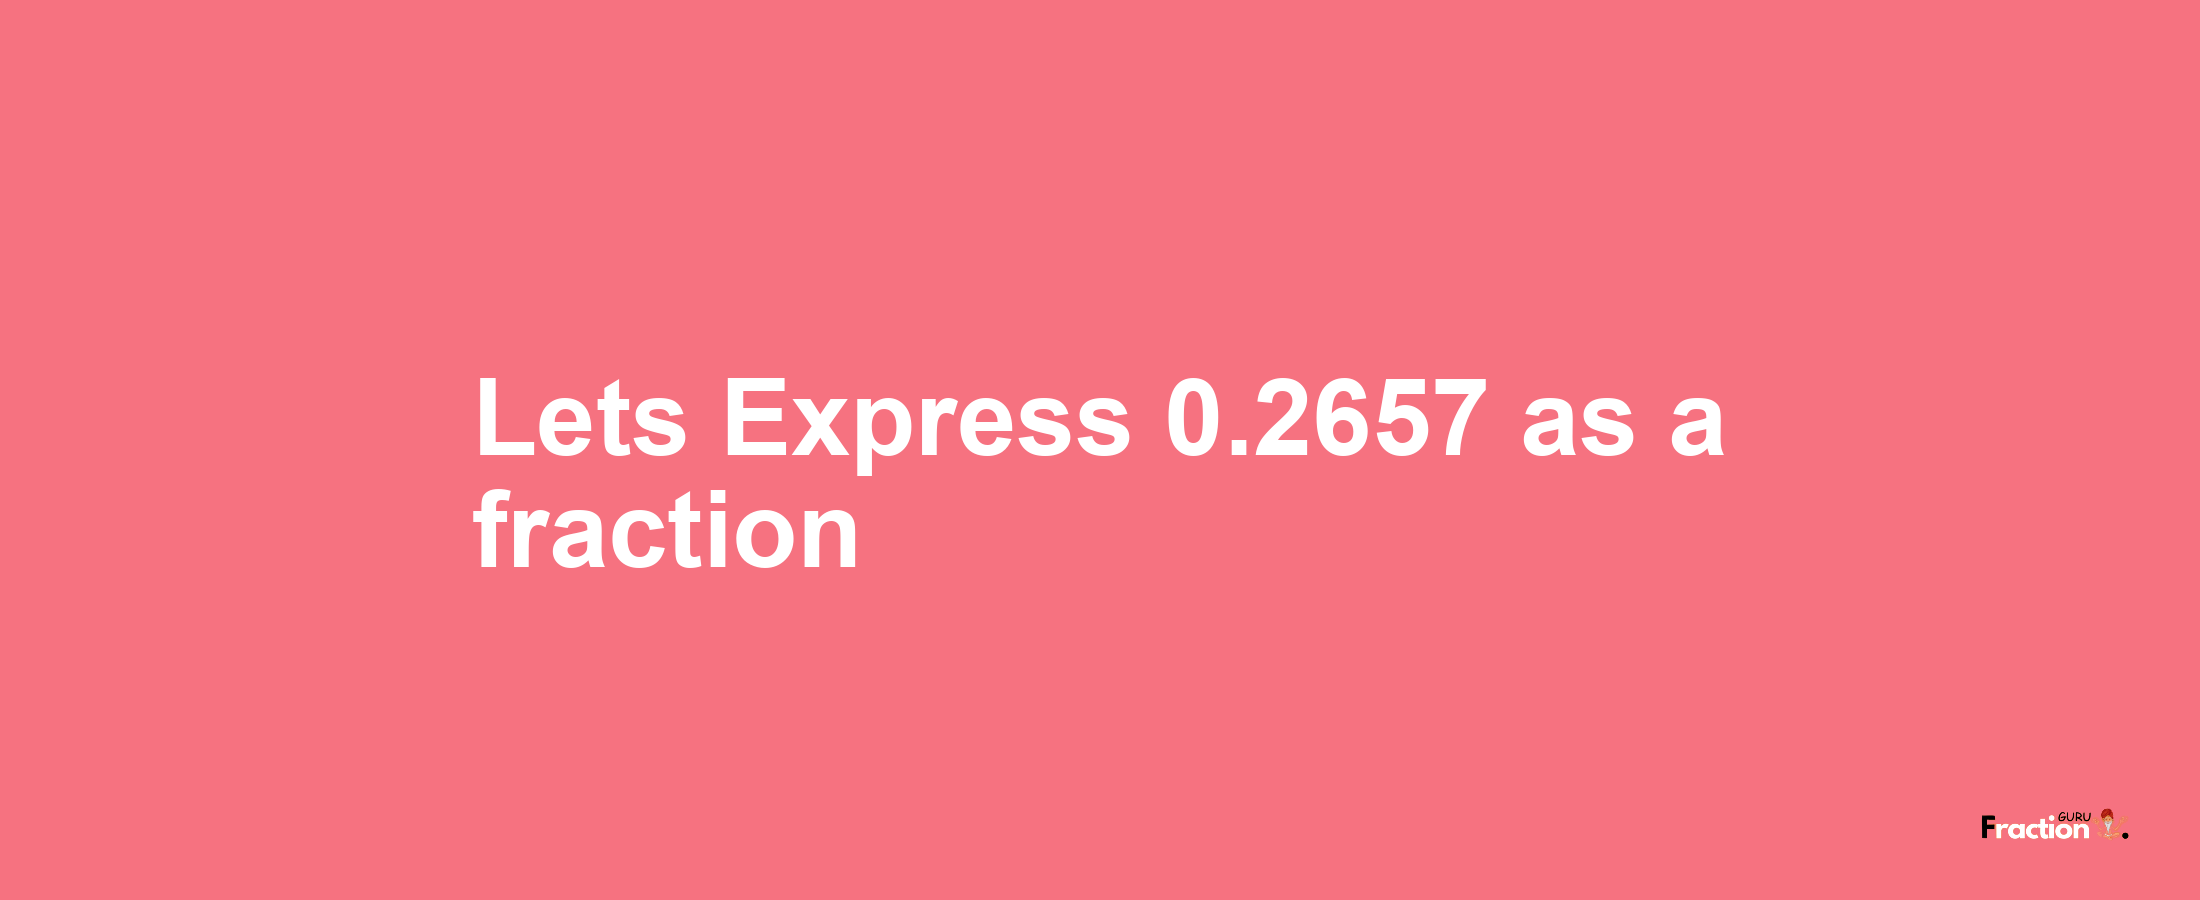 Lets Express 0.2657 as afraction